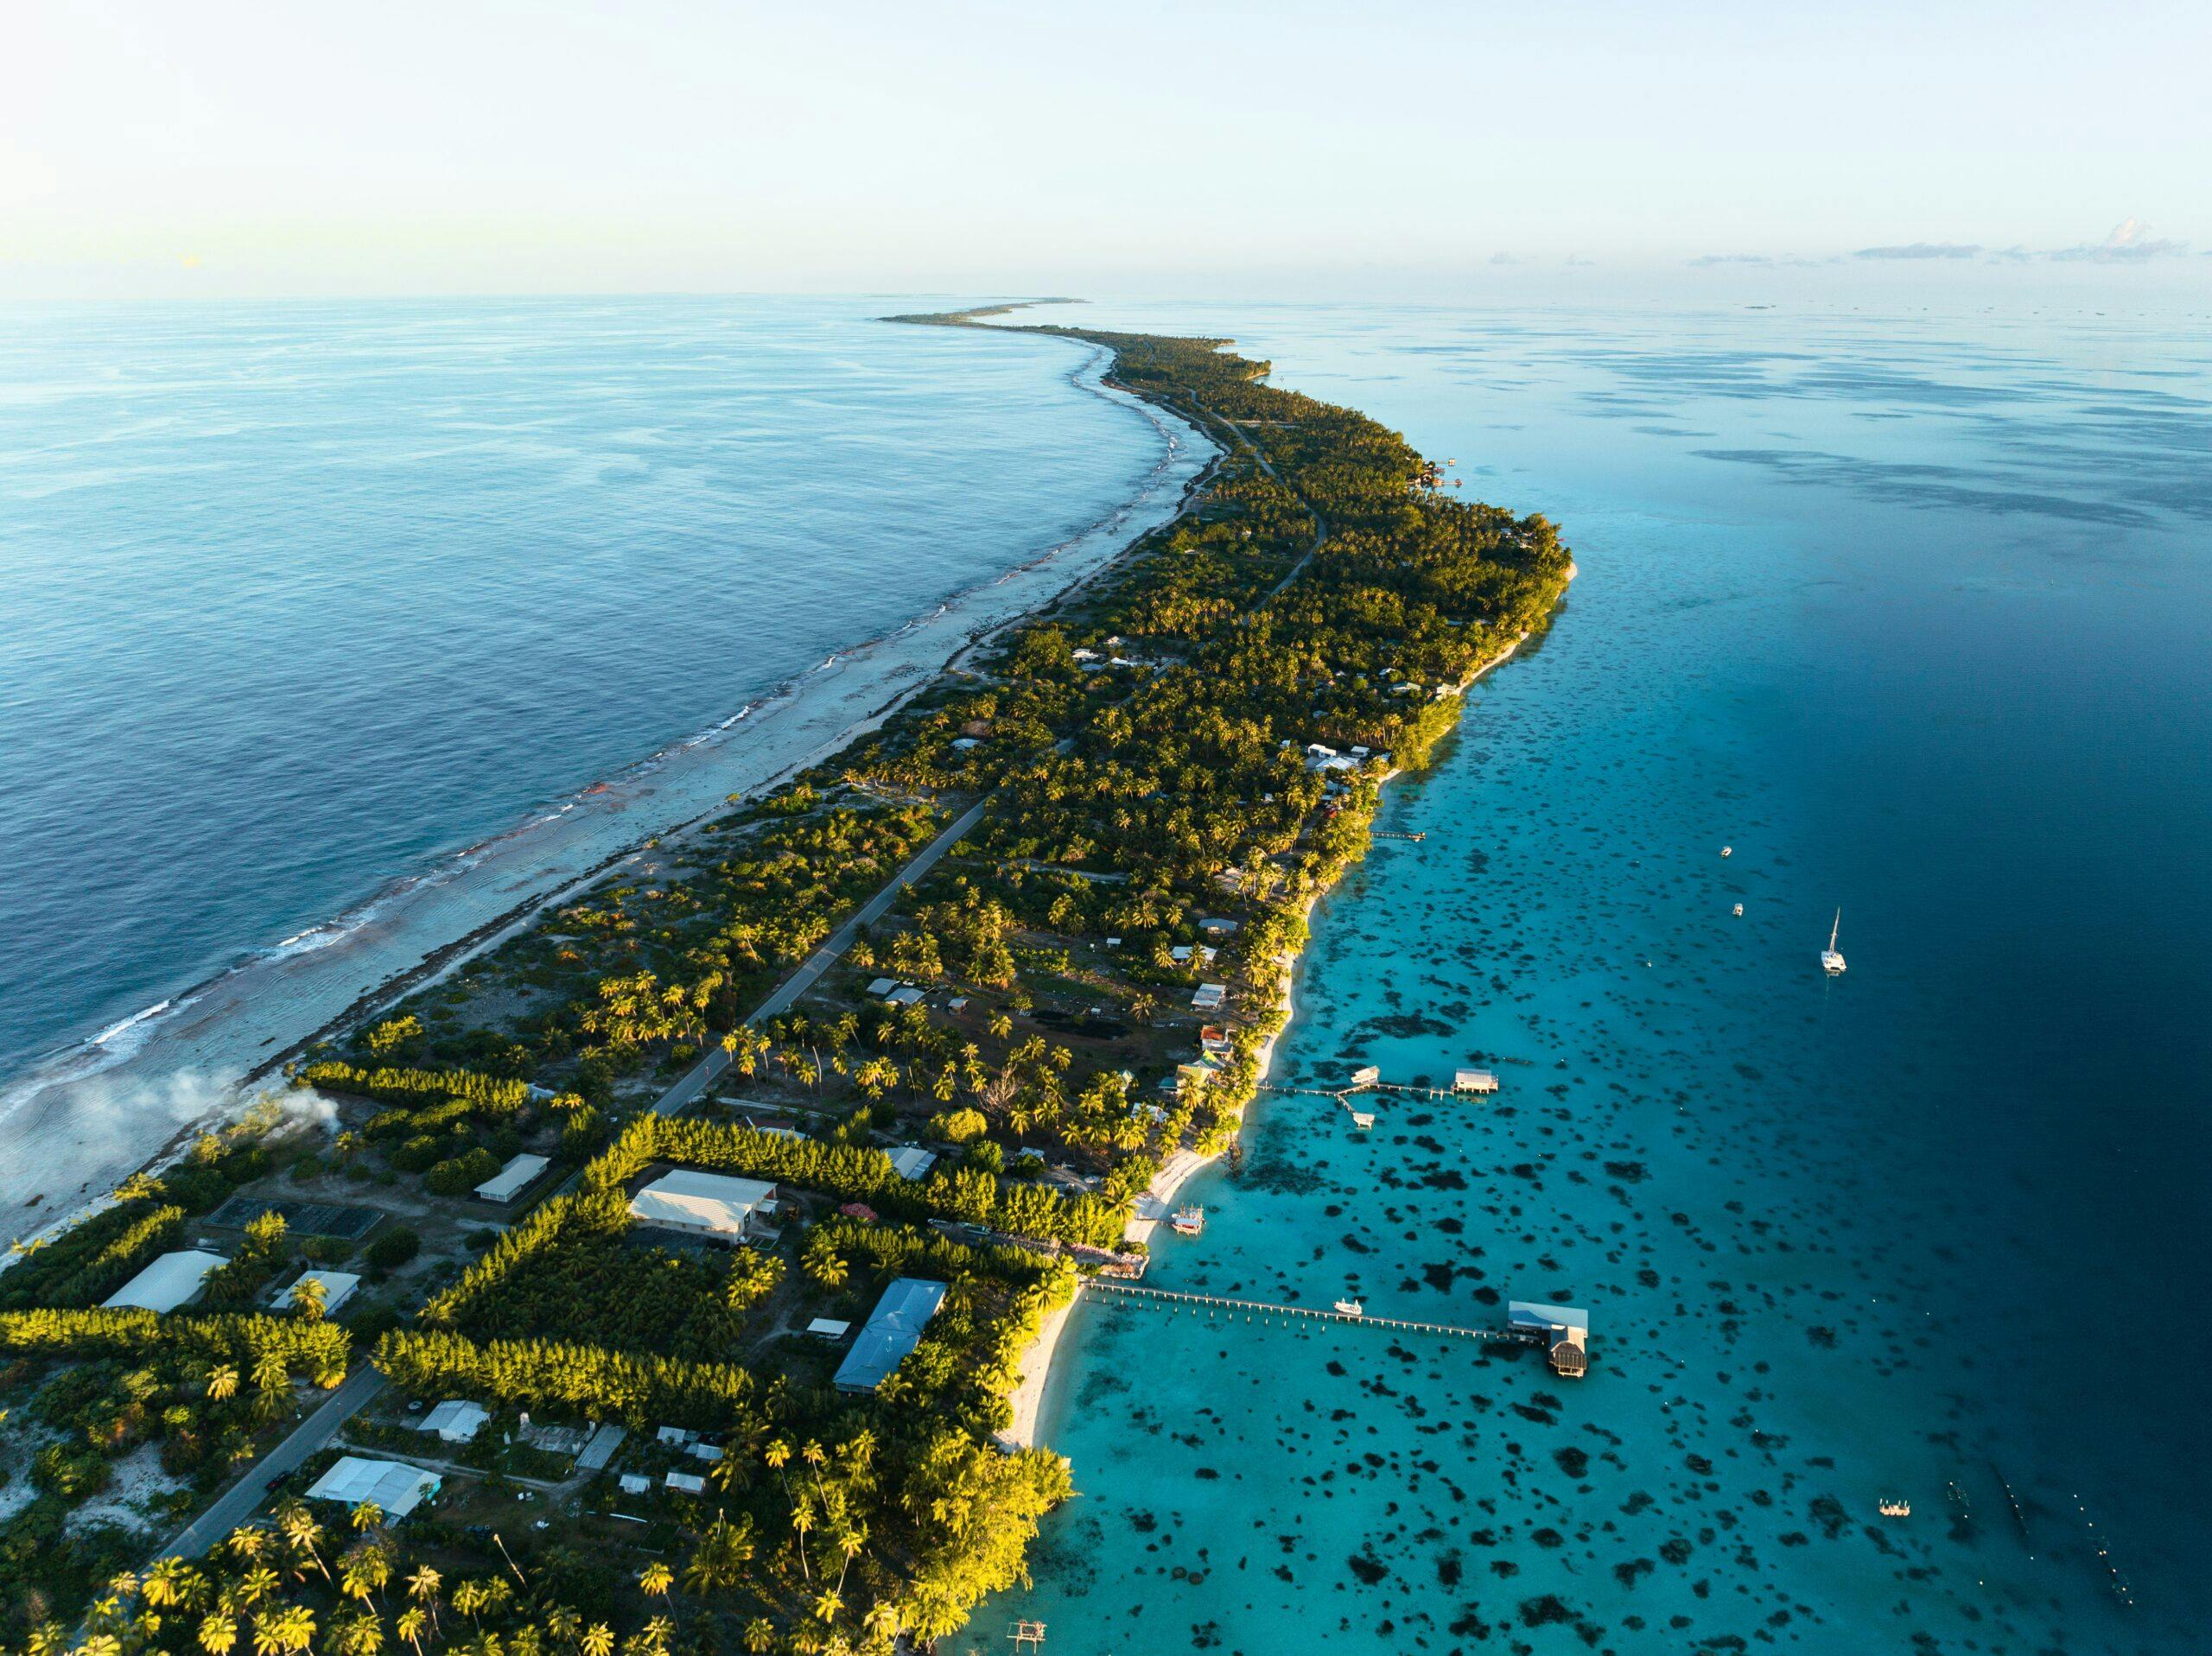 Aerial view of Fakarava shows the green island scape with the bright blue ocean